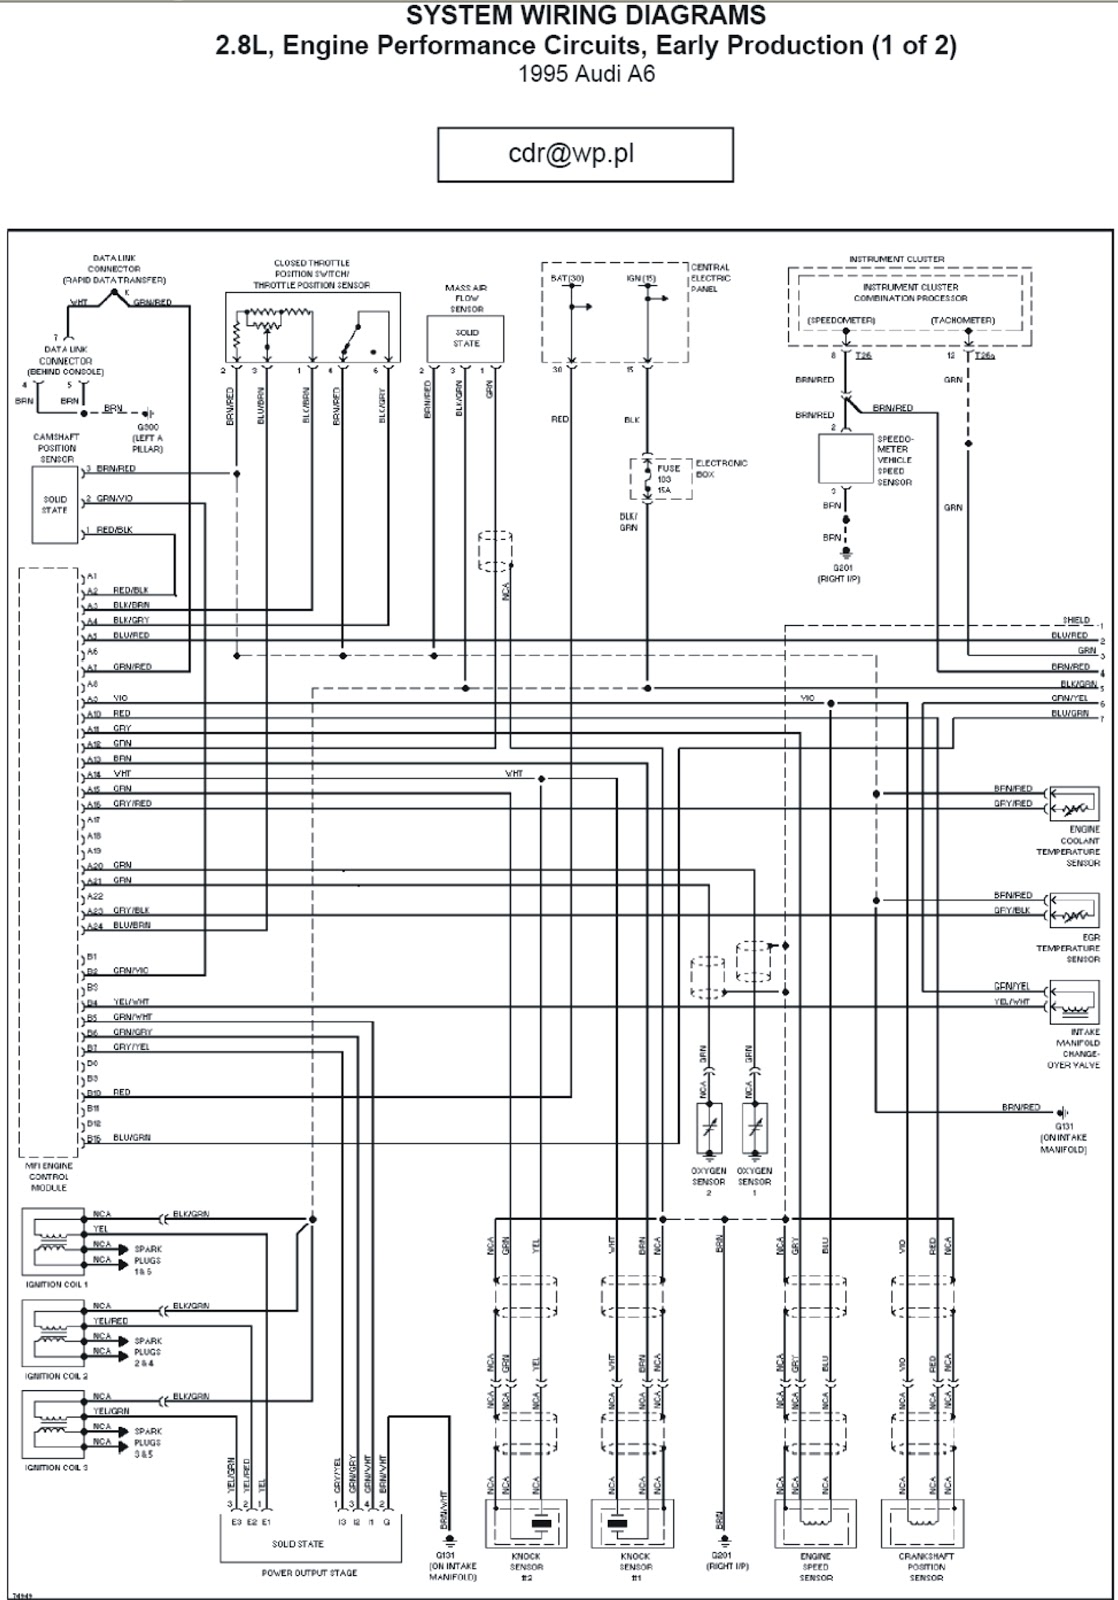 1996 Audi A6 Engine  put it on Circuits Wiring Diagrams  